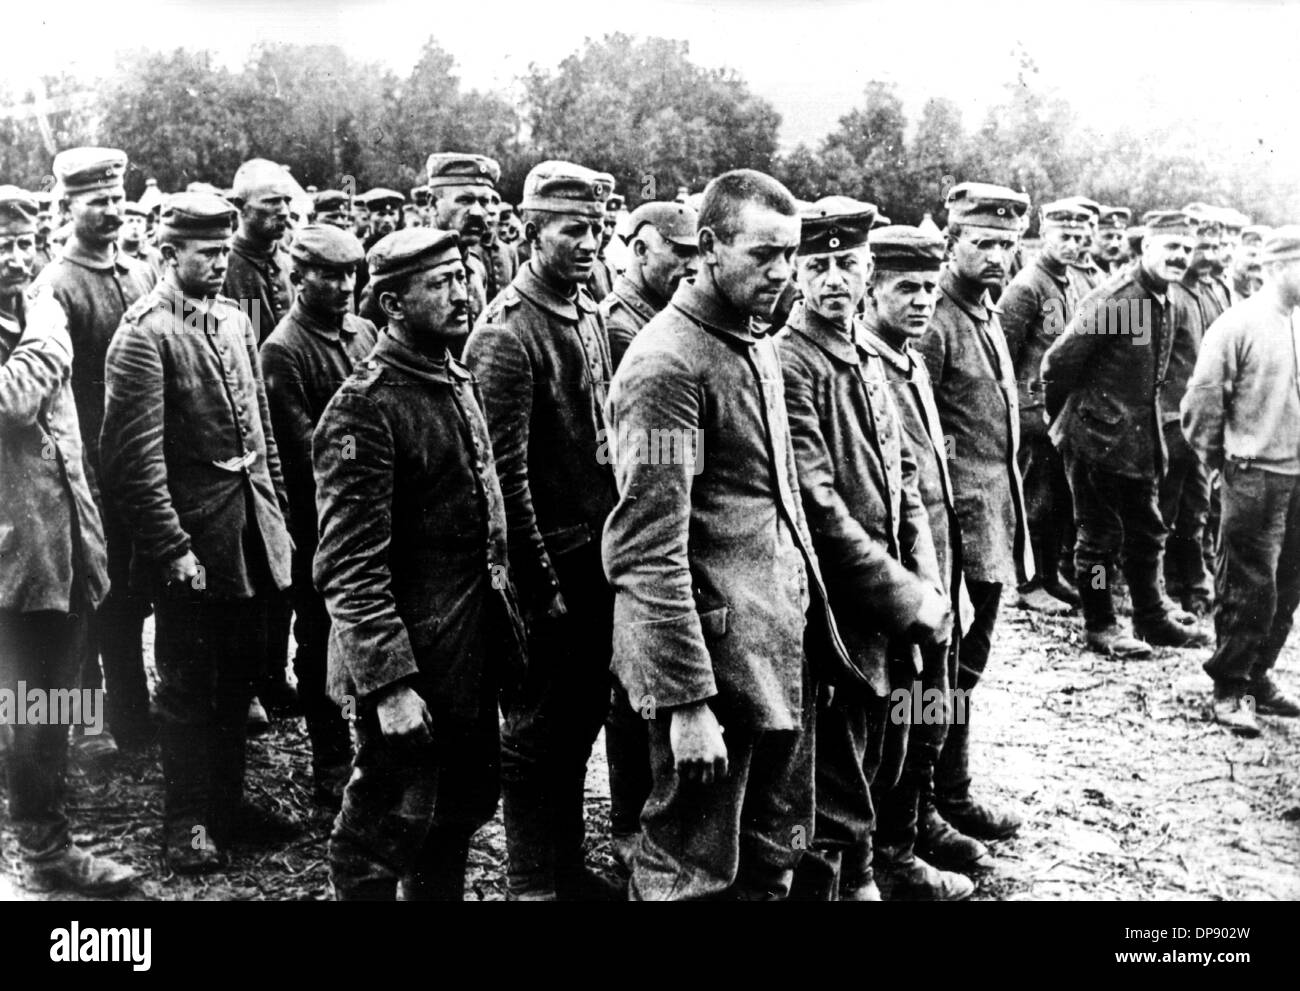 A group of German soldiers, who became British prisoners of war during the major offensive at the Western front in April 1918. Set off by the deadly shots on Austrian heir to the throne Franz Ferdinand by Serbian nationalists on the 28th of June in 1914 in Sarajevo, World War I broke out. During World War I, Germany, Austria, Austria-Hungary as well as later Turkey and Bulgary fought against Britain, France and Russia. The sad end result in 1918 comprised roughly 8.5 million soldiers killed in action, more than 21 million wounded and almost 8 million prisoners of war and missing people. Stock Photo